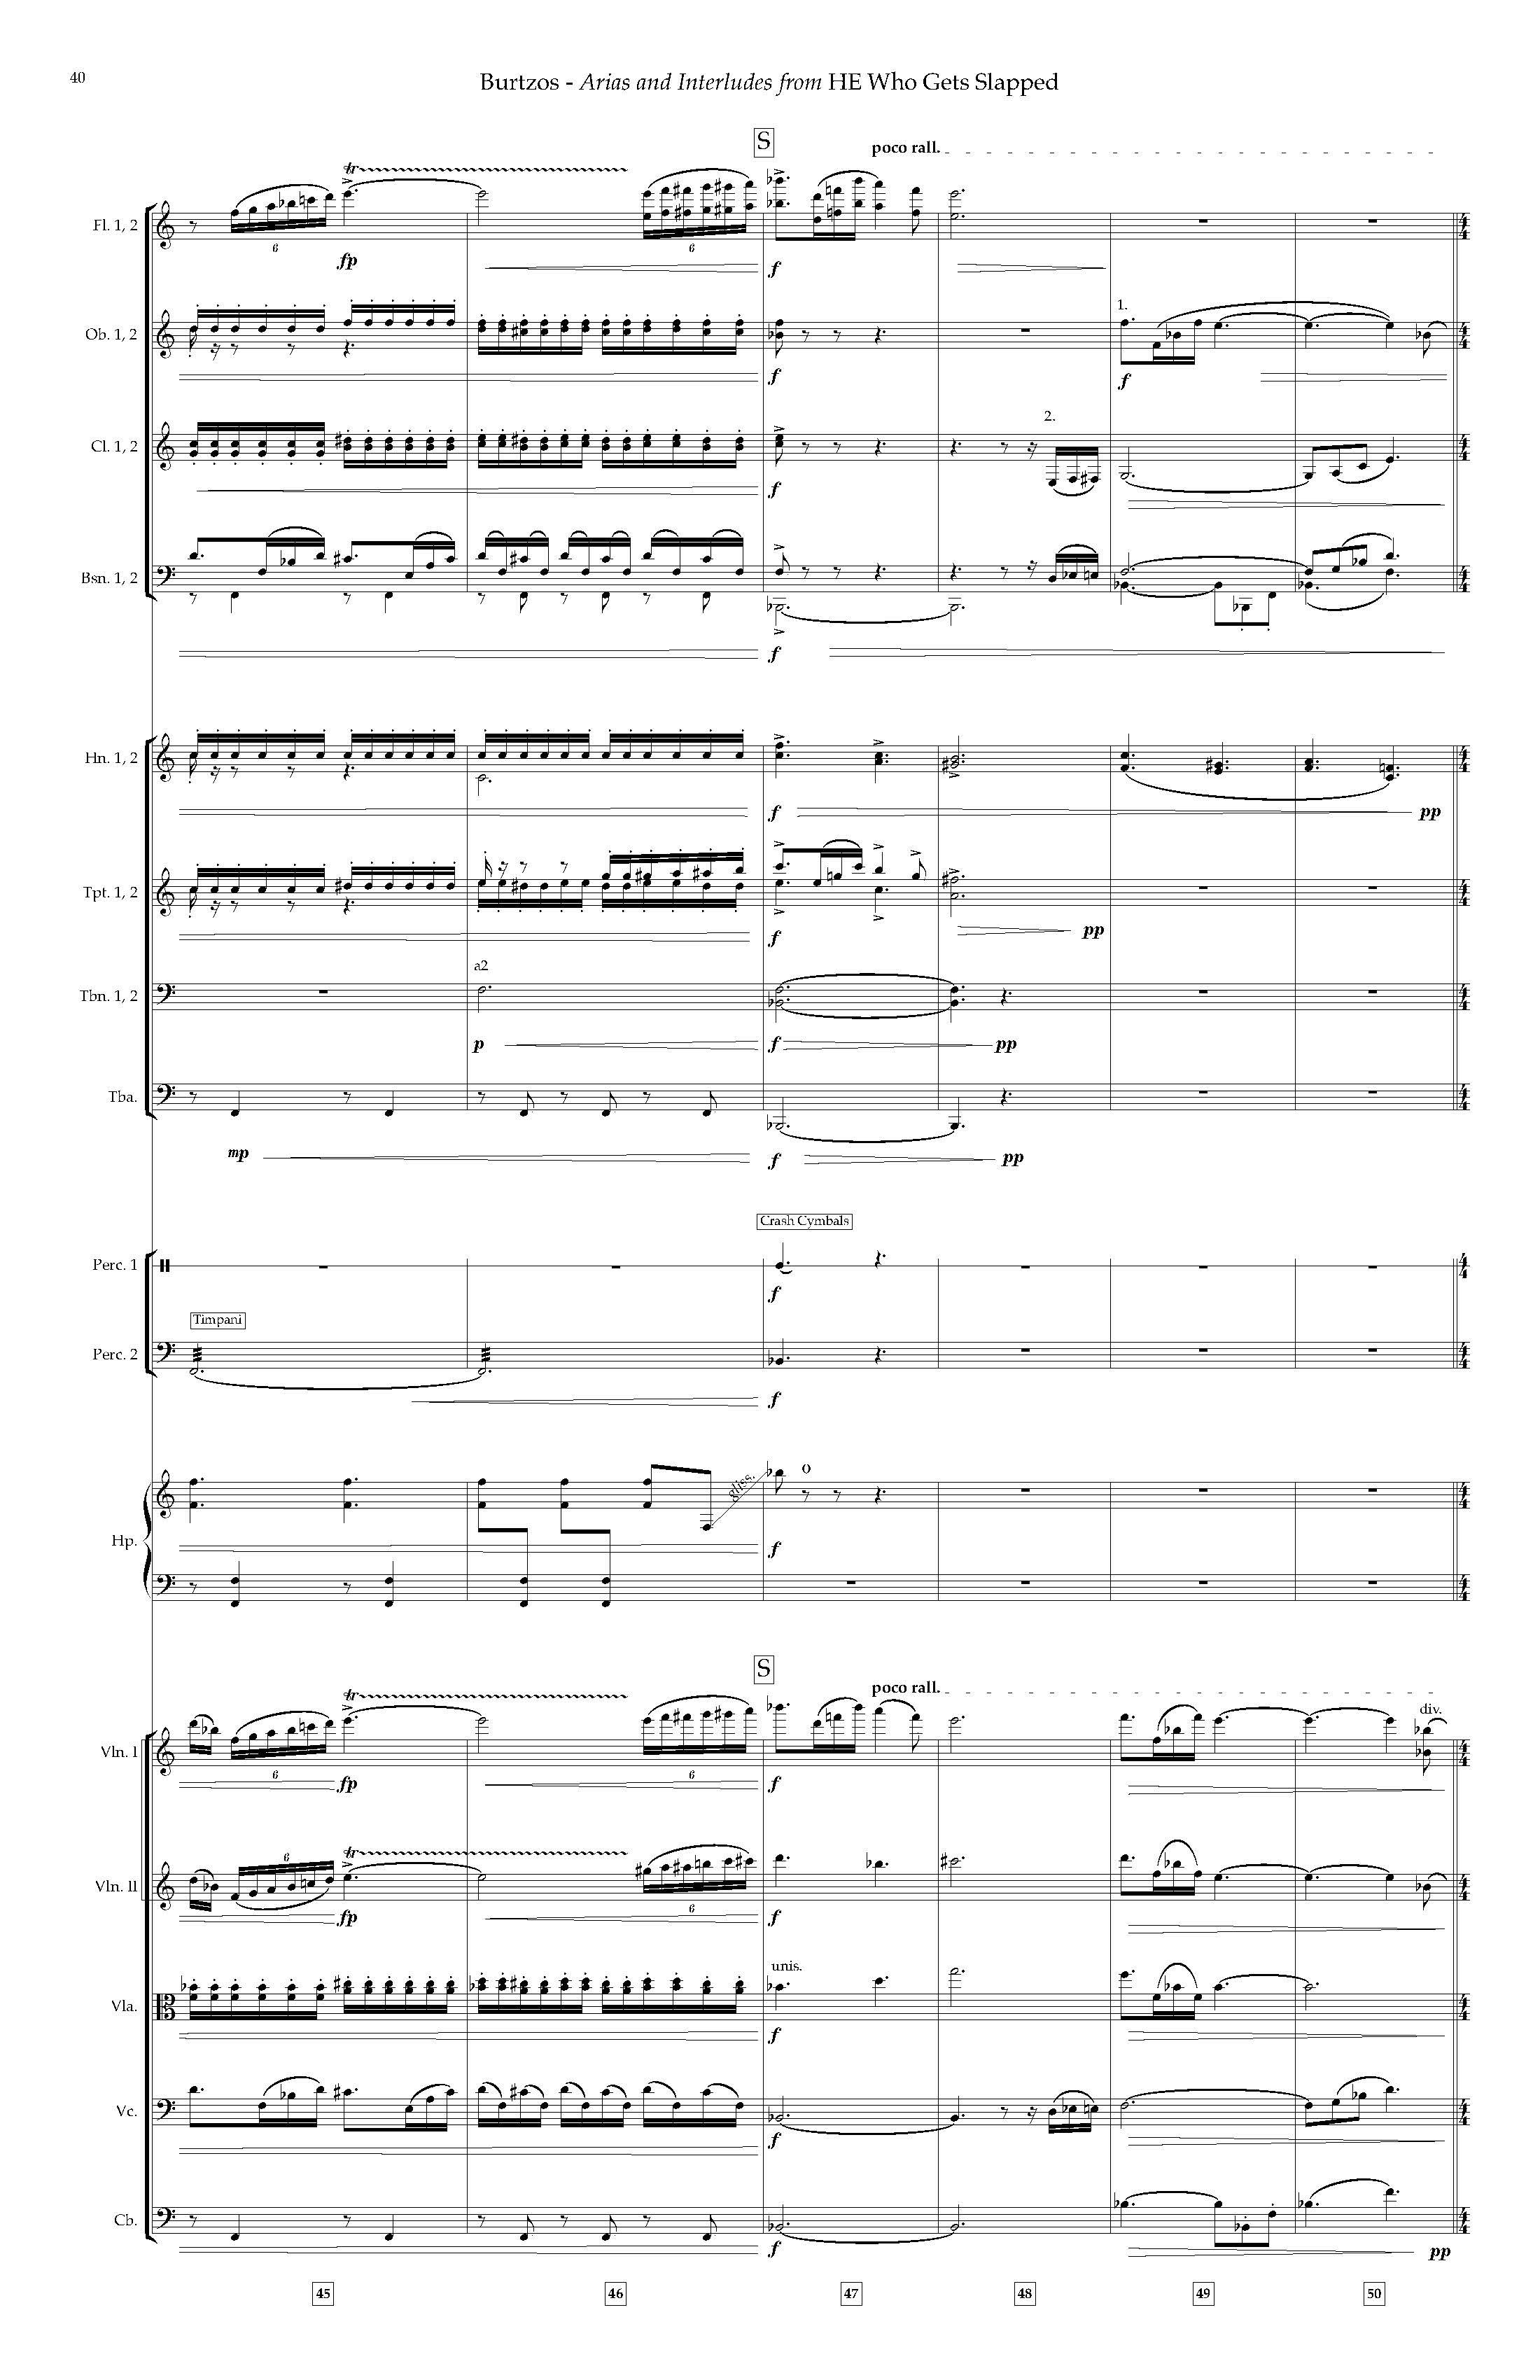 Arias and Interludes from HWGS - Complete Score_Page_46.jpg